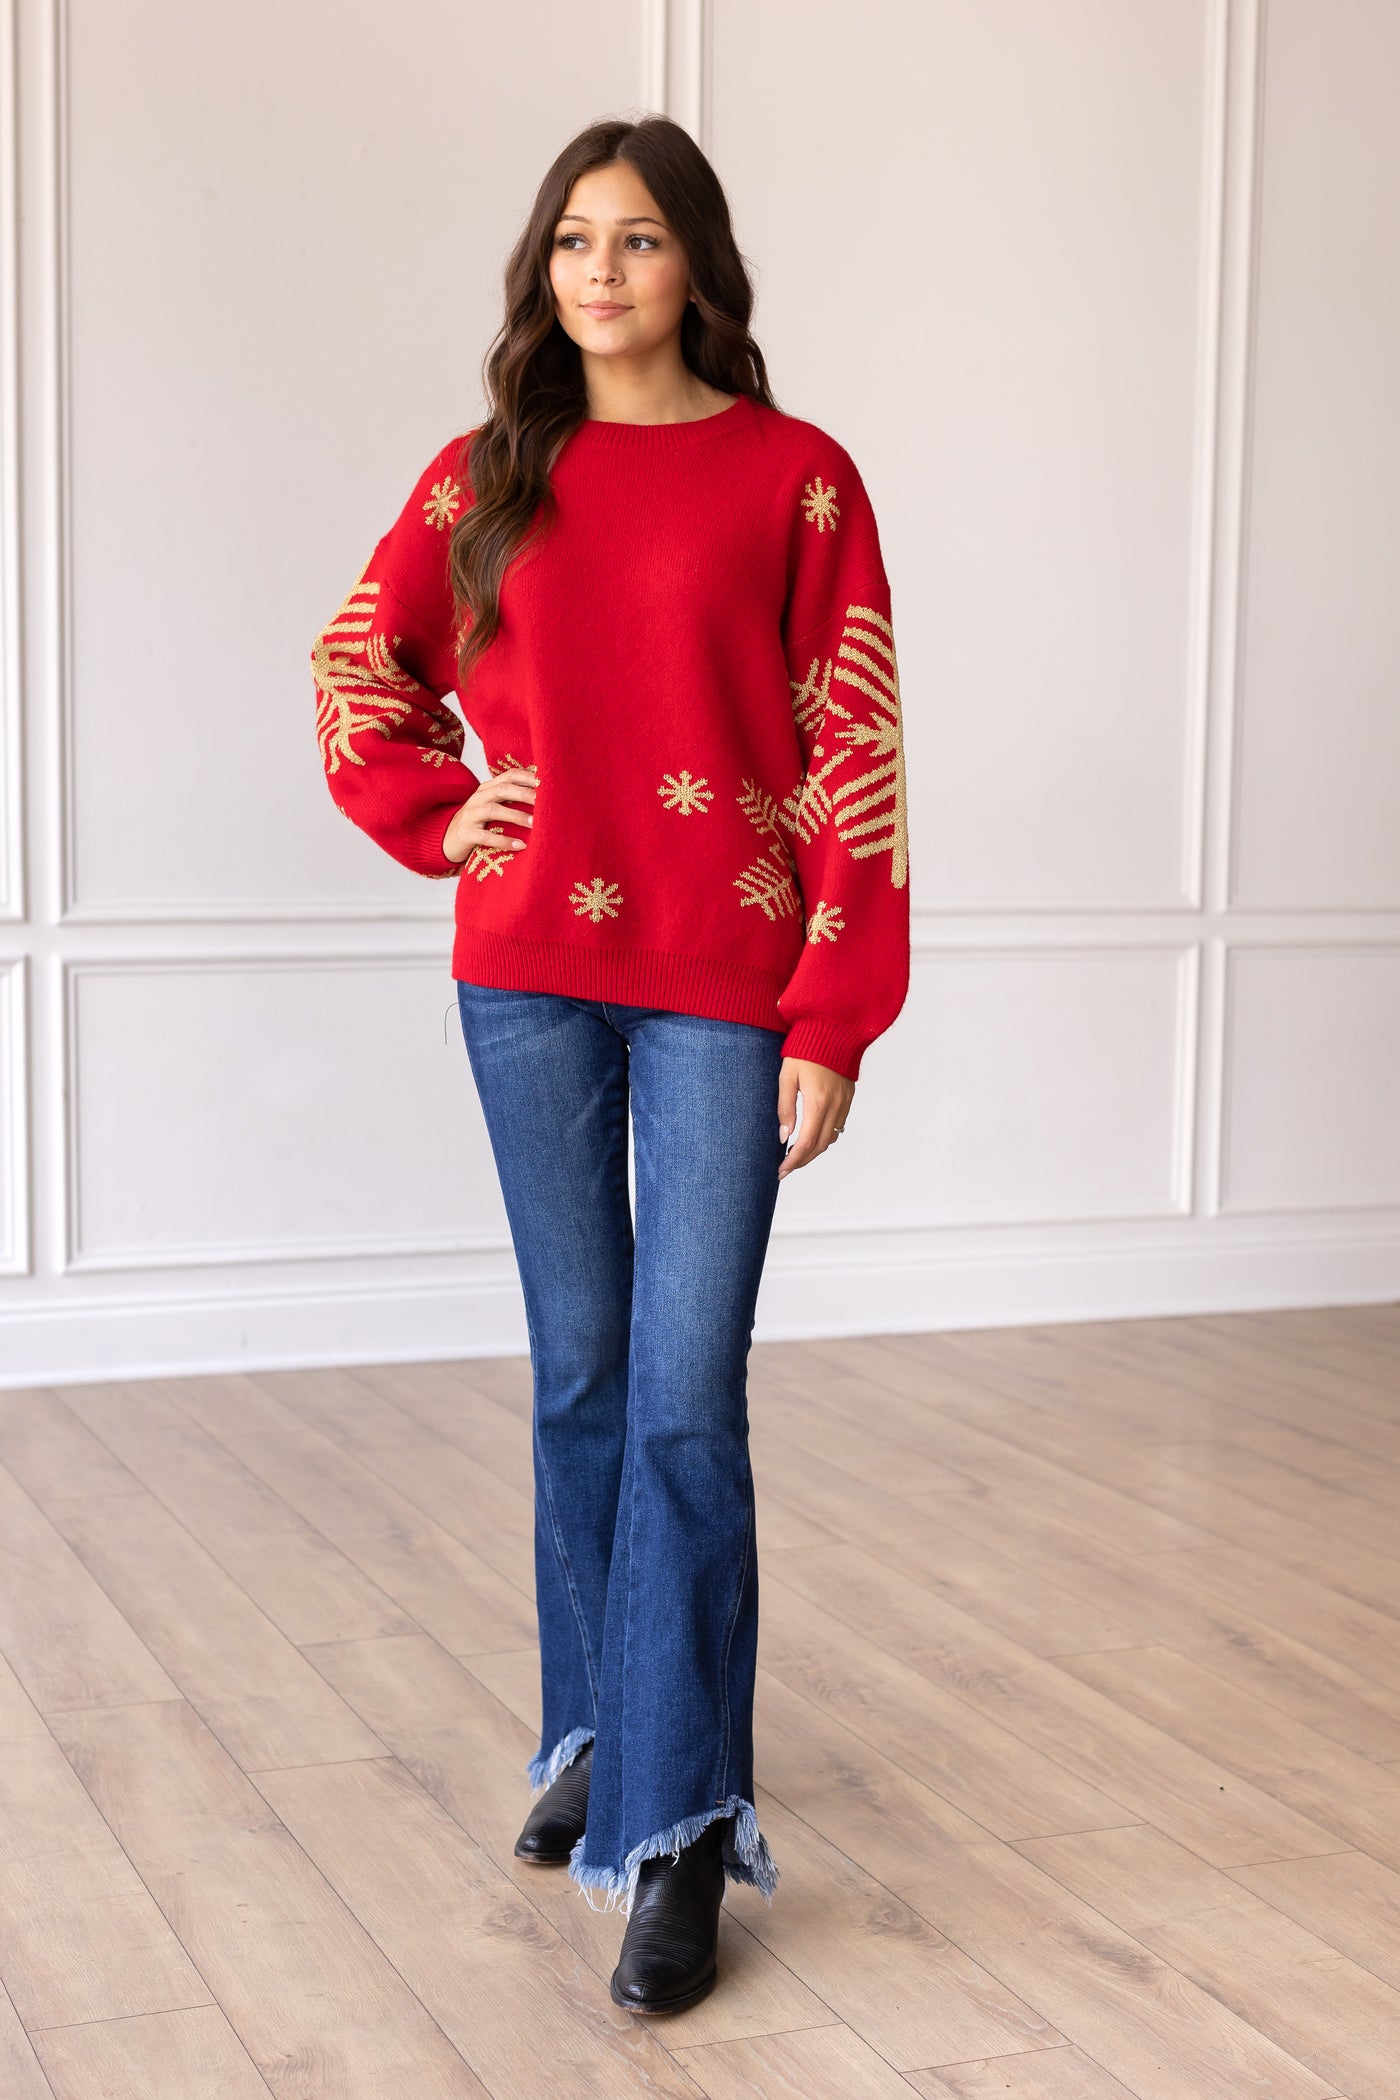 Nightfall Frost Red Sweater with Gold Snowflakes